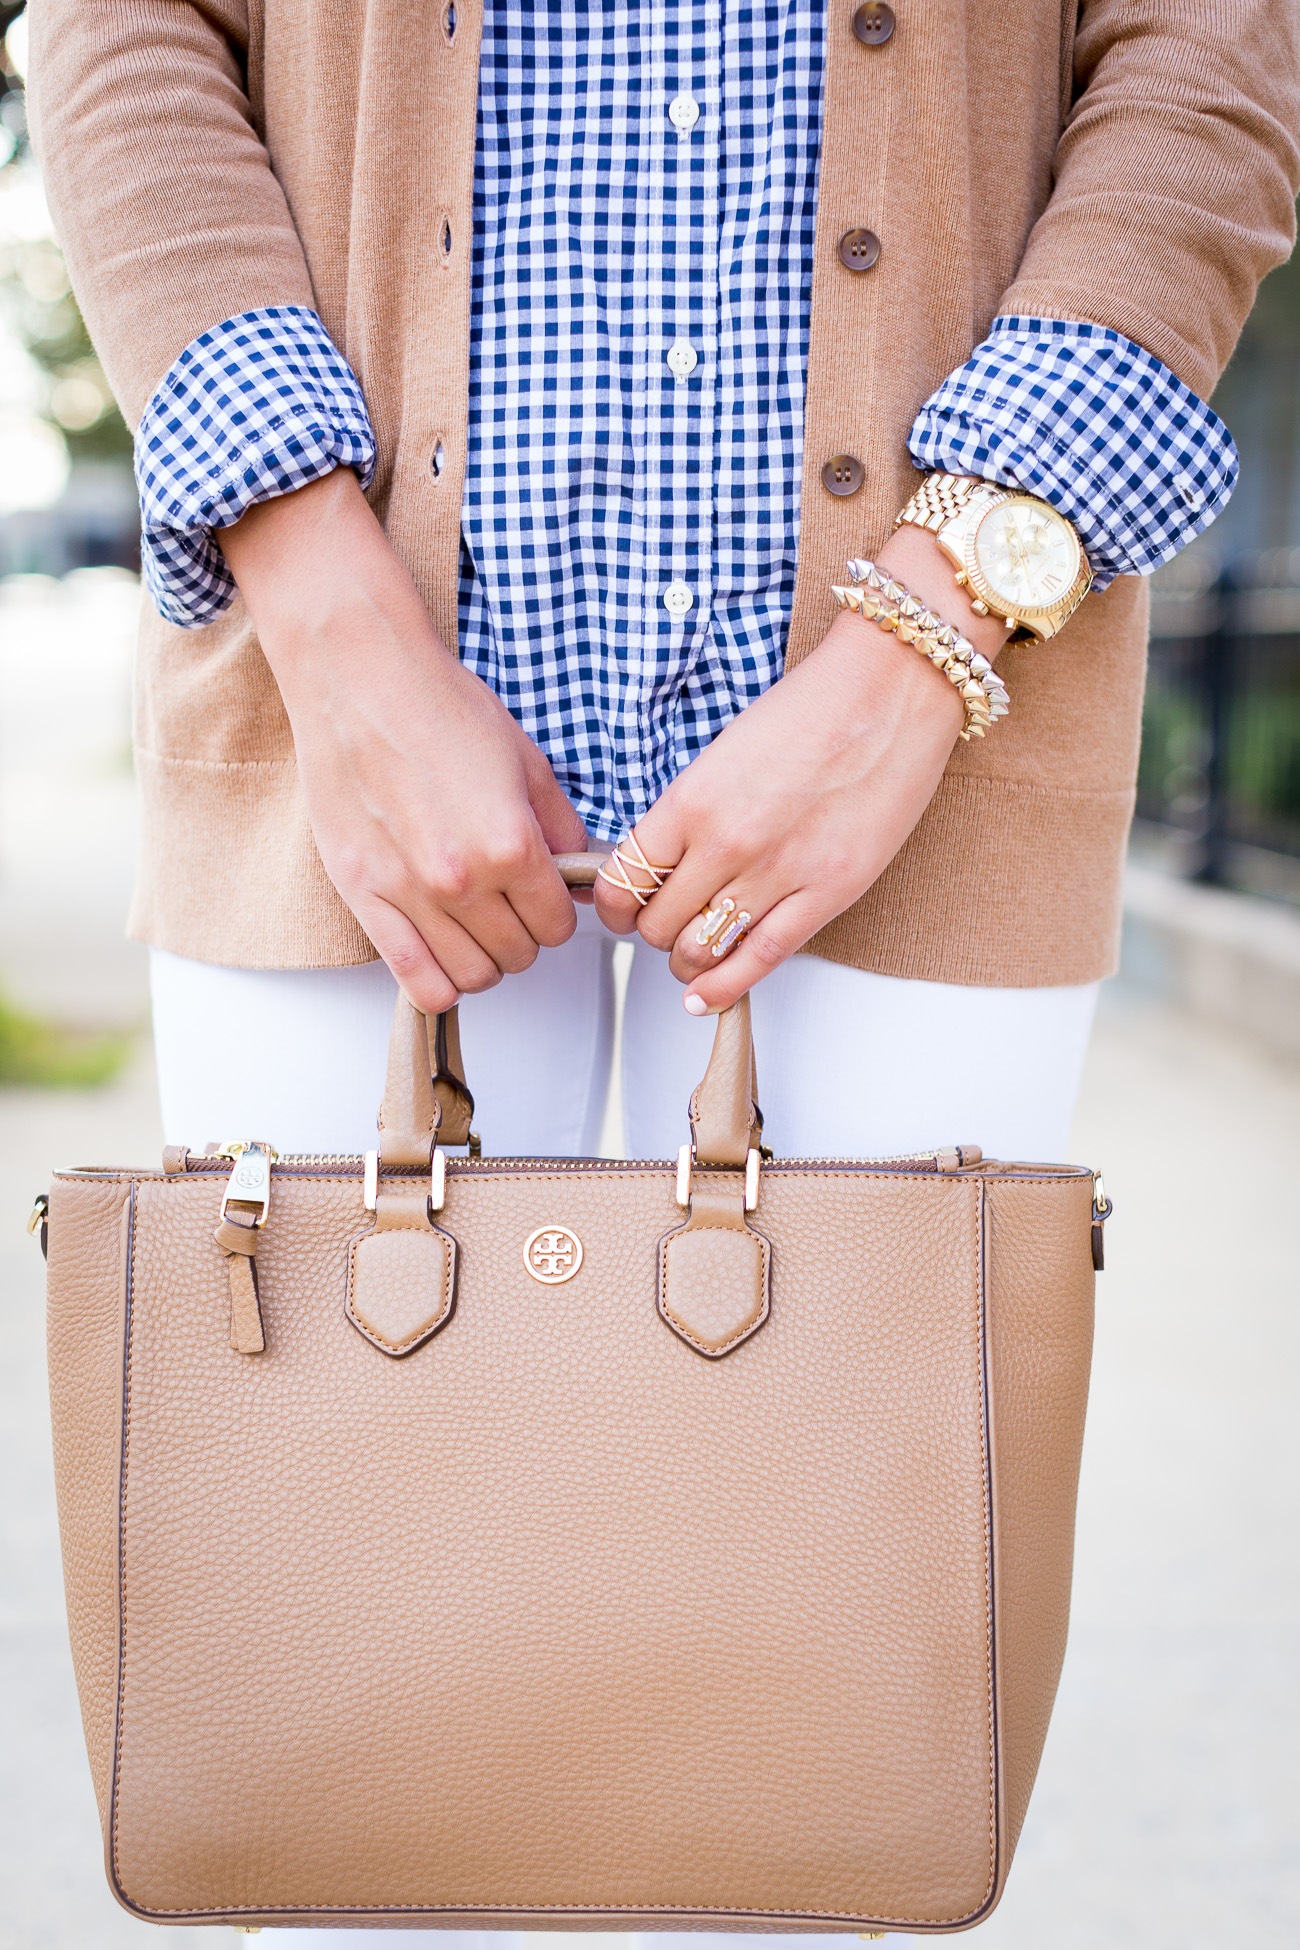 varsity sweater, gingham shirt, fall outfit ideas, tory burch tote // a southern drawl